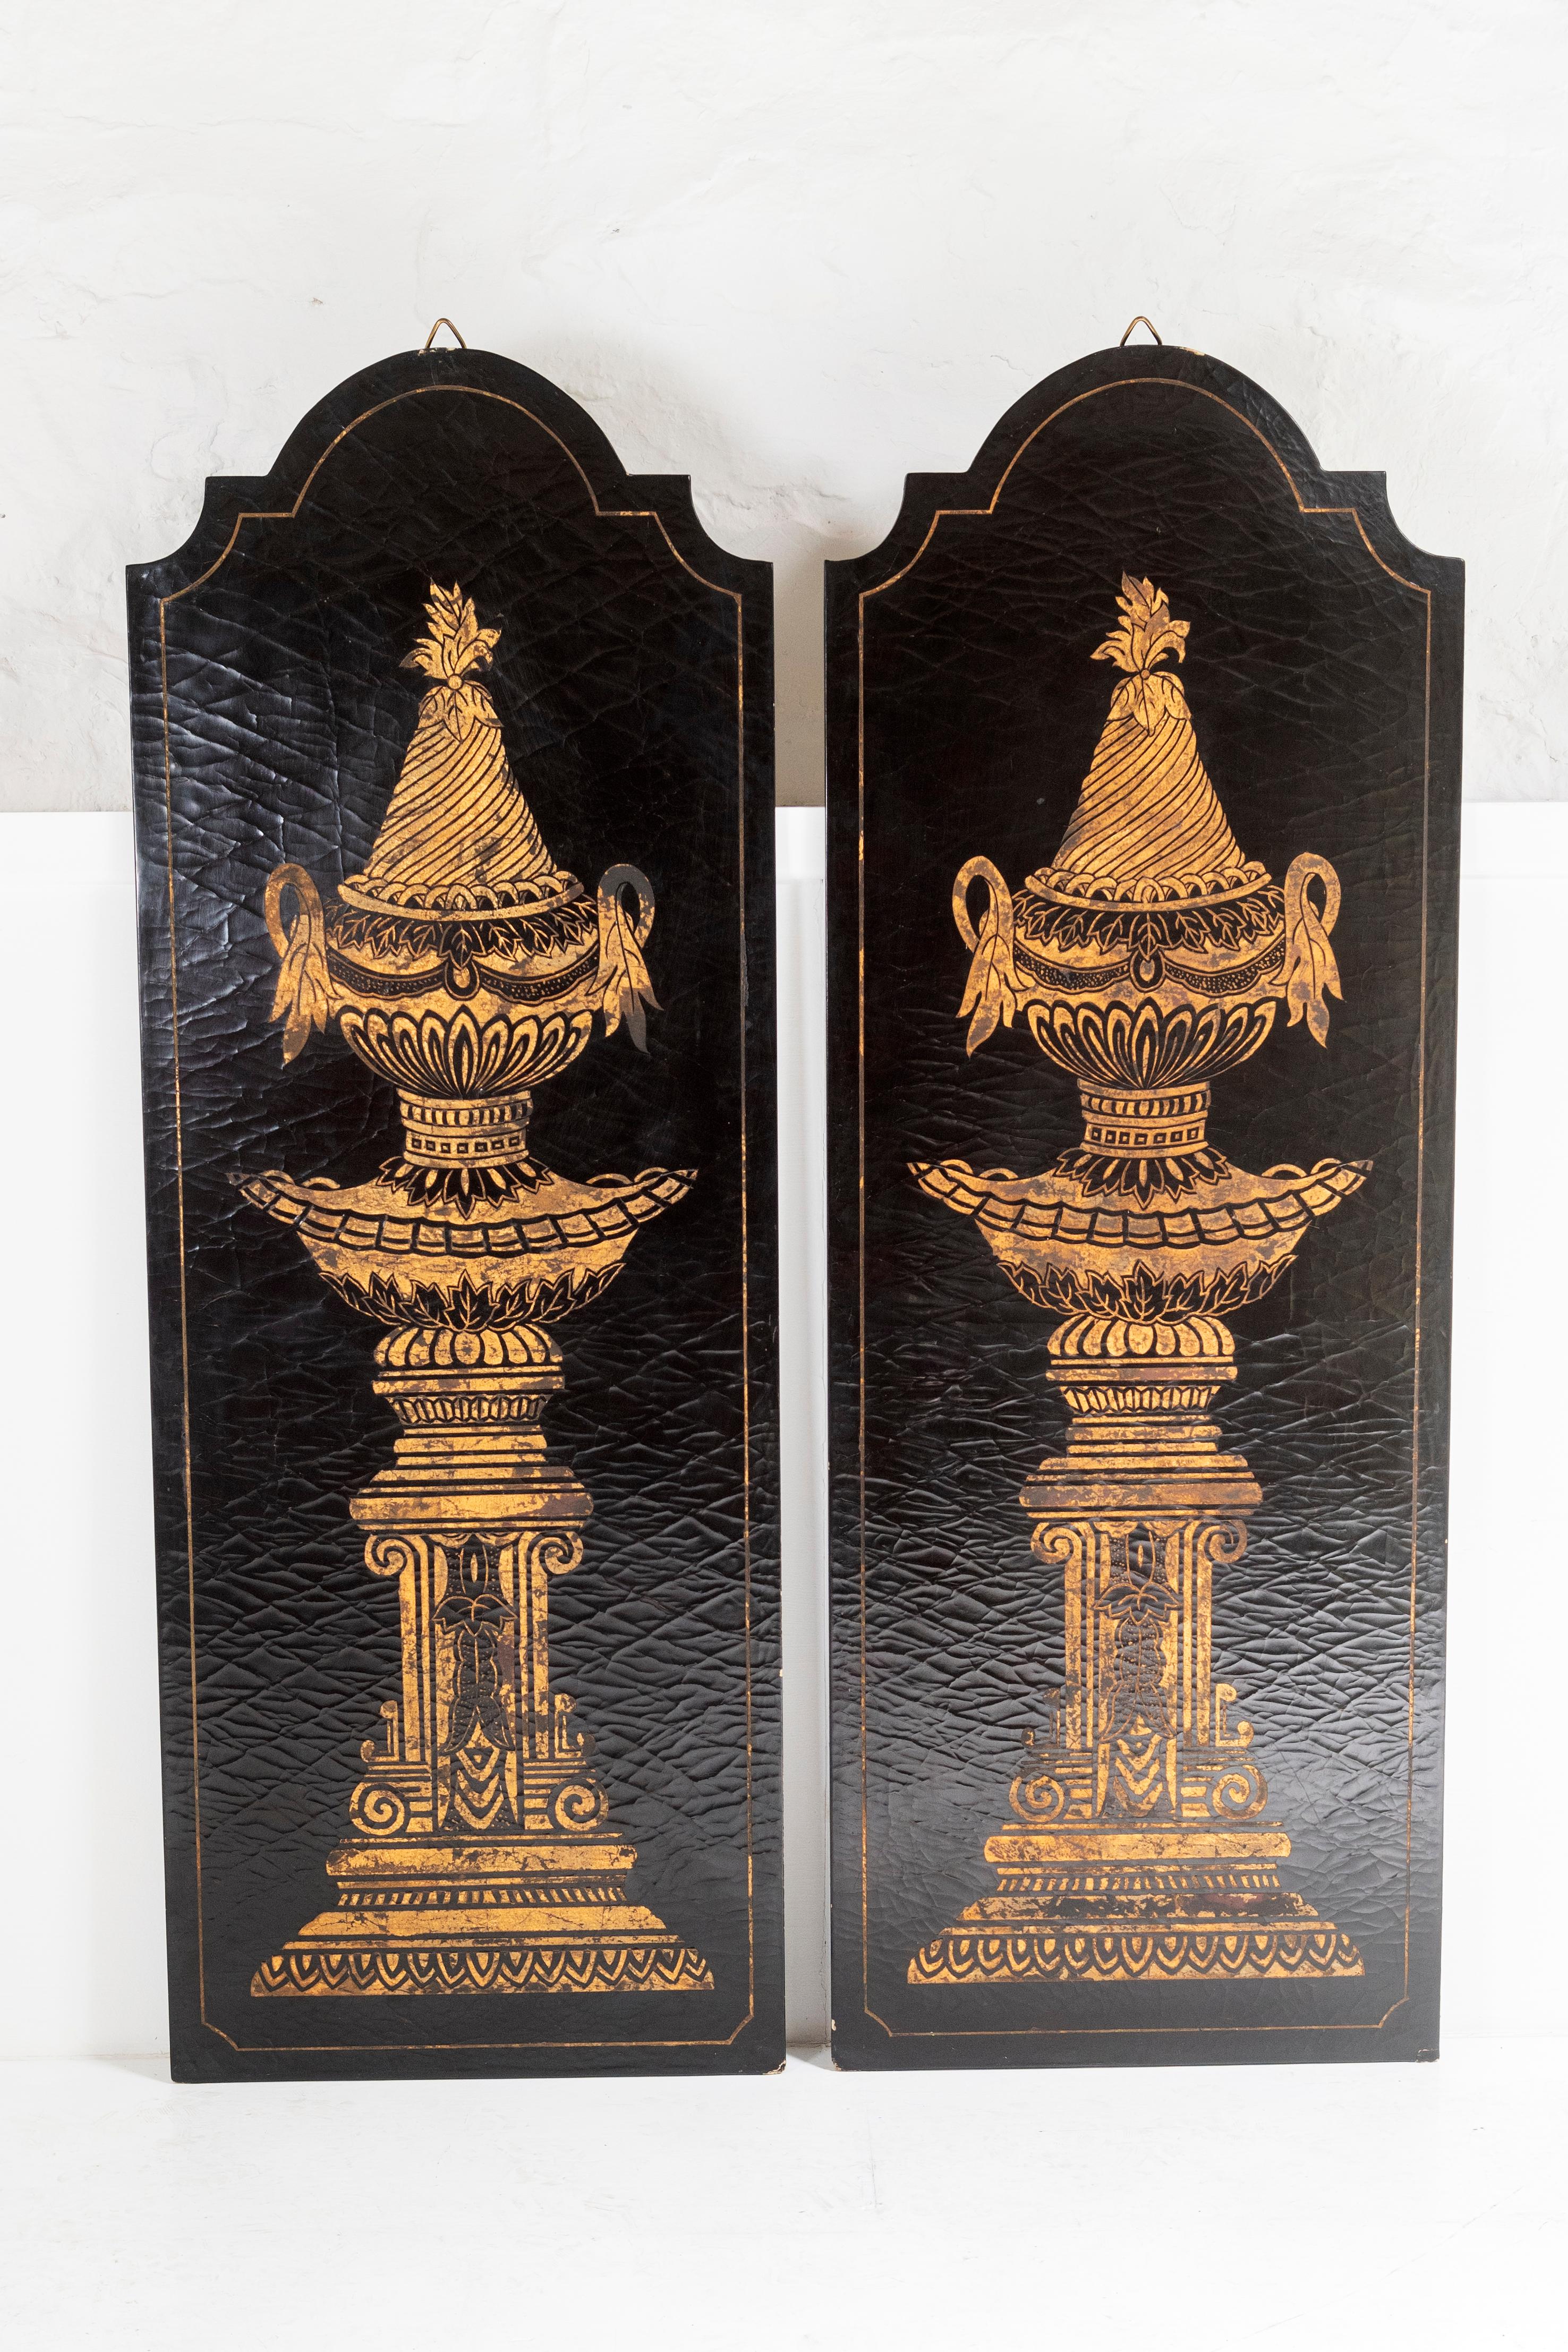 British Pair of Large Decorative Wall Panels Gold Empire Urns on Black Lacquered Gesso  For Sale